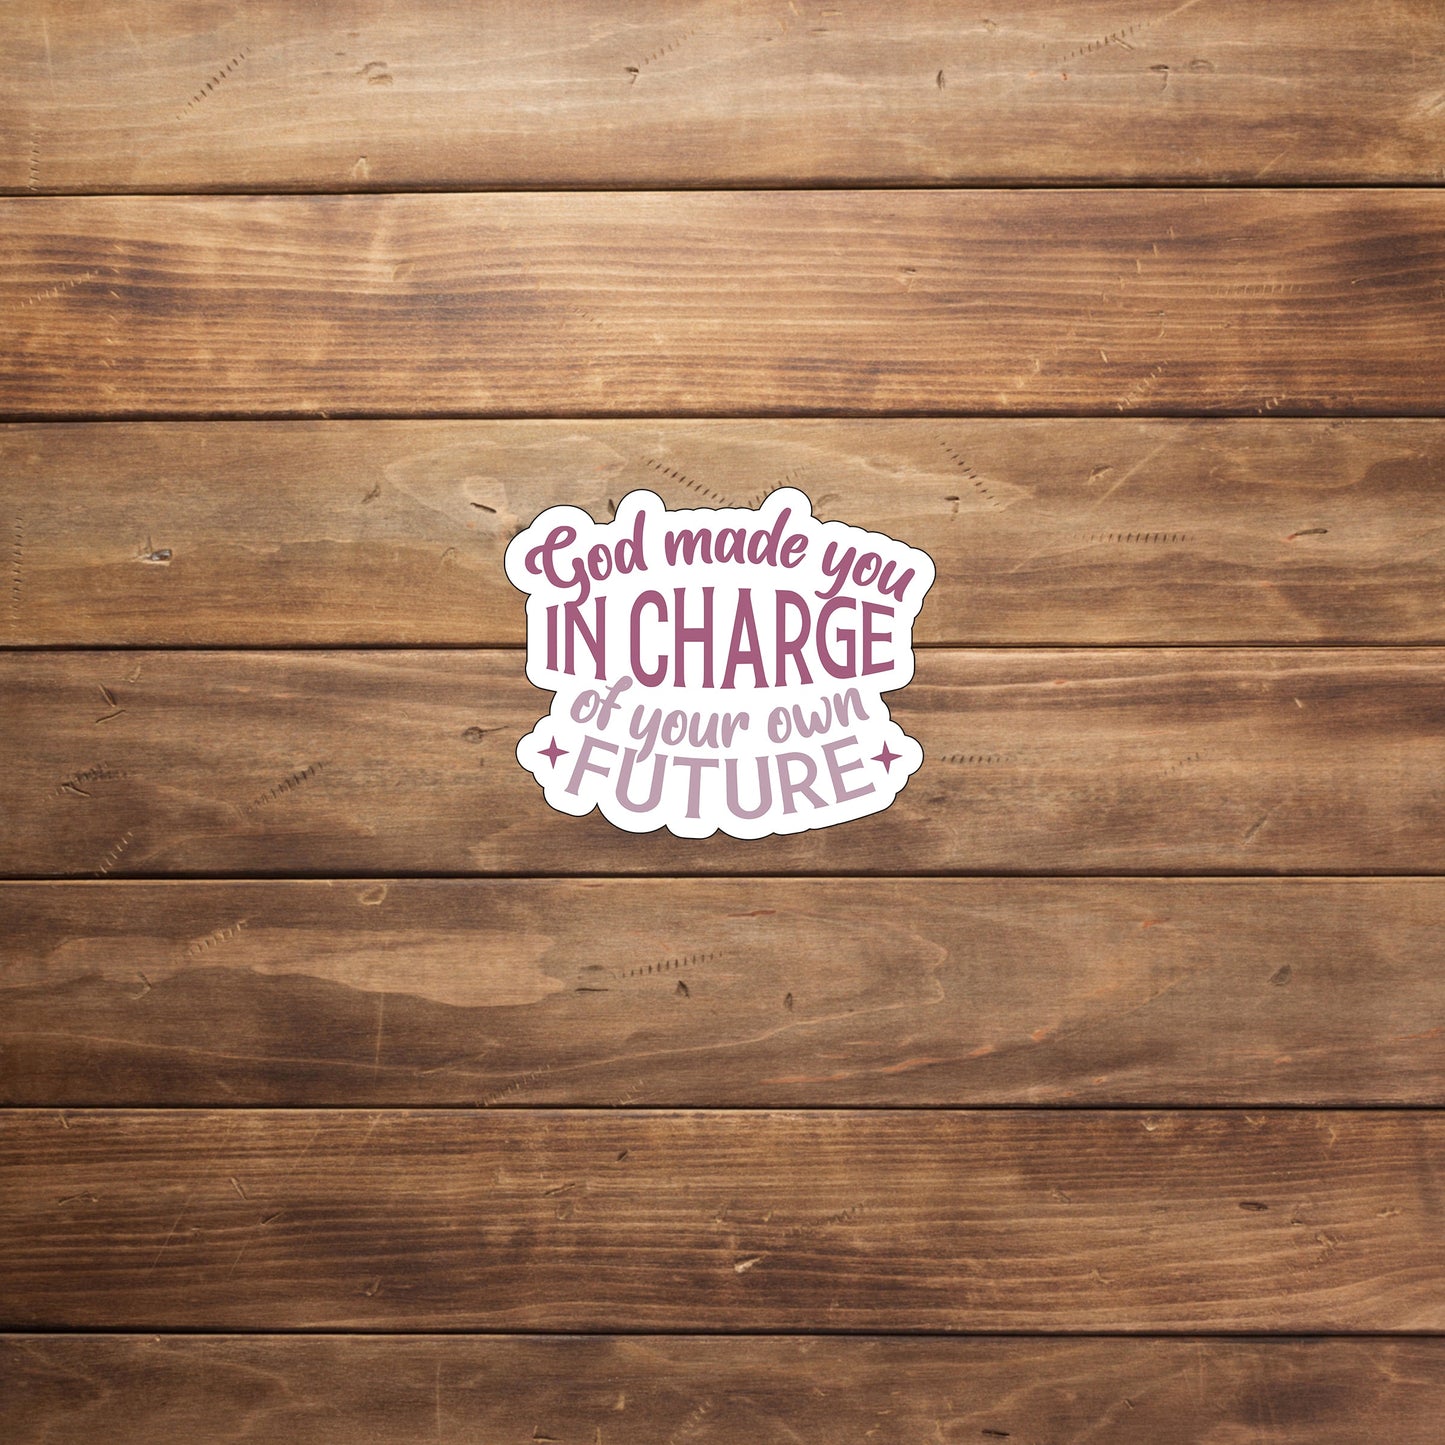 God made you in charge of your own future  Sticker,  Vinyl sticker, laptop sticker, Tablet sticker